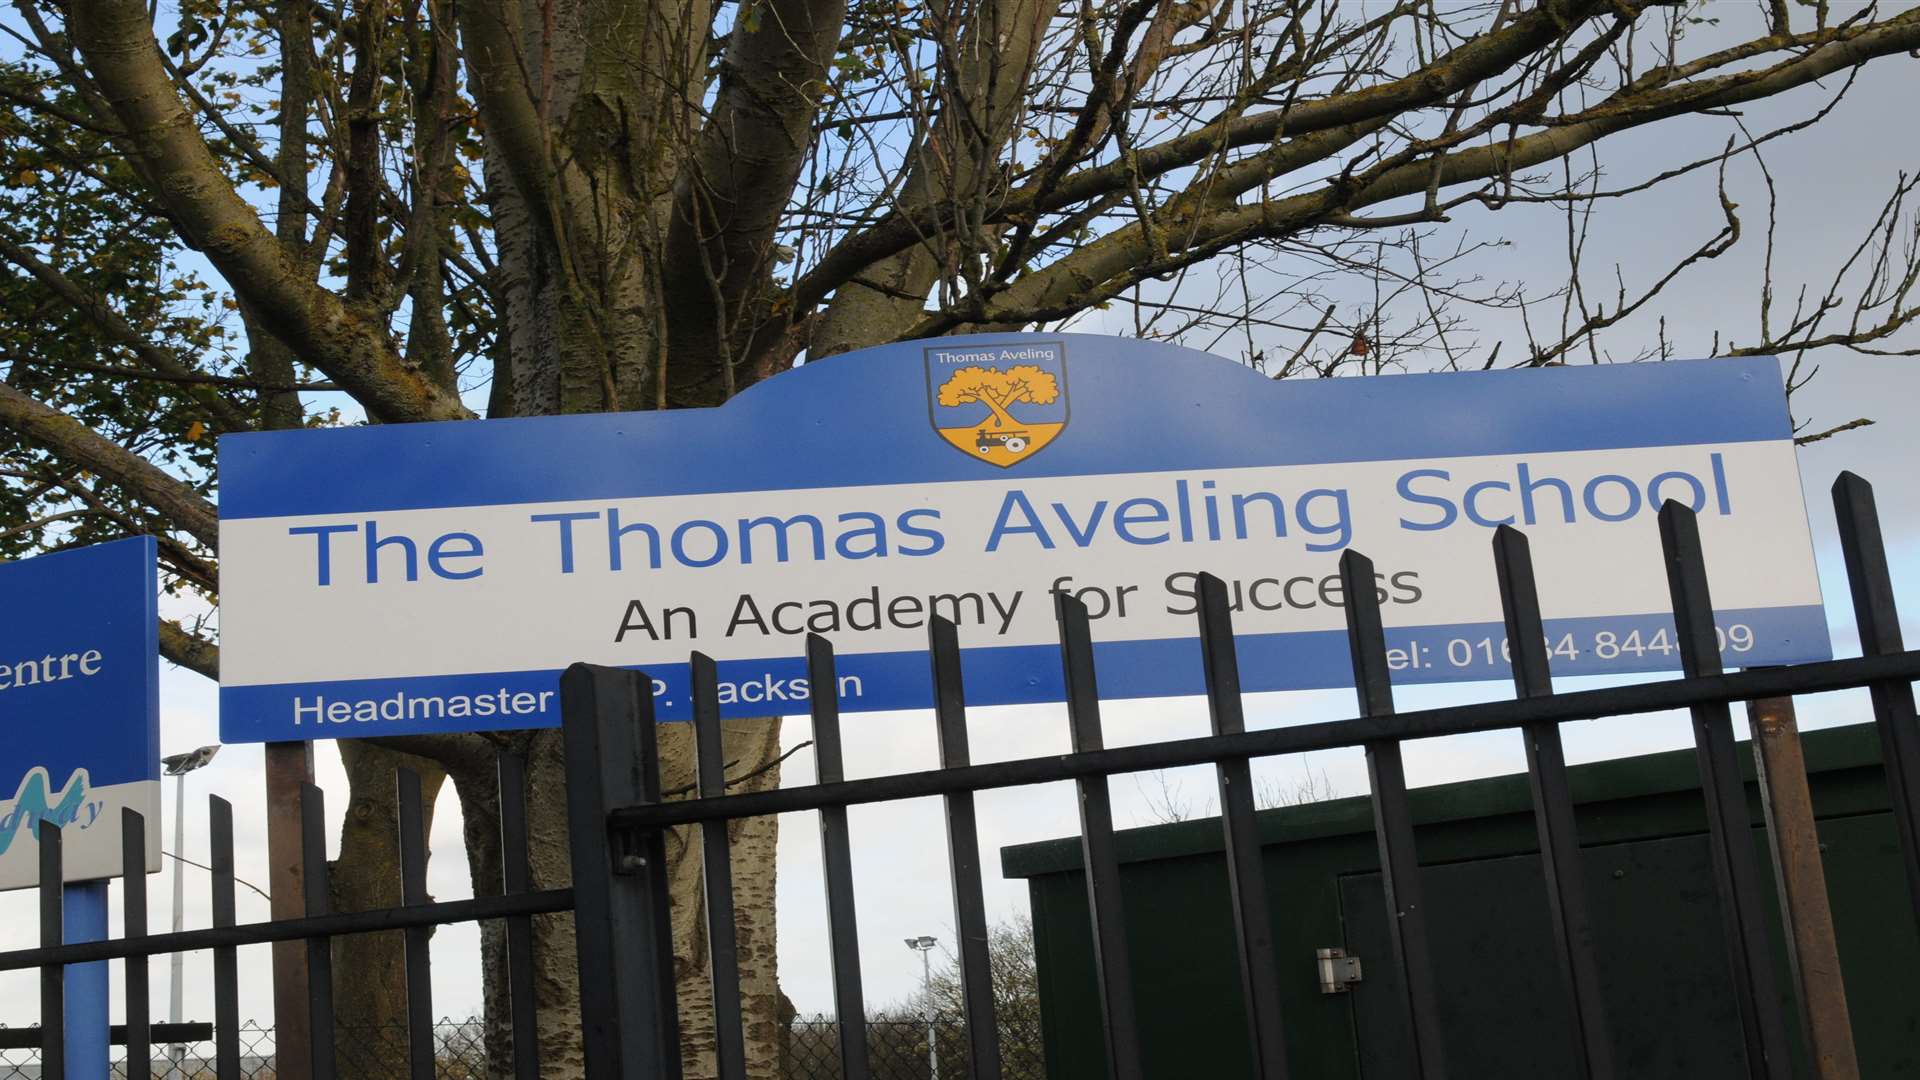 The Thomas Aveling School, Arethusa Road, Rochester